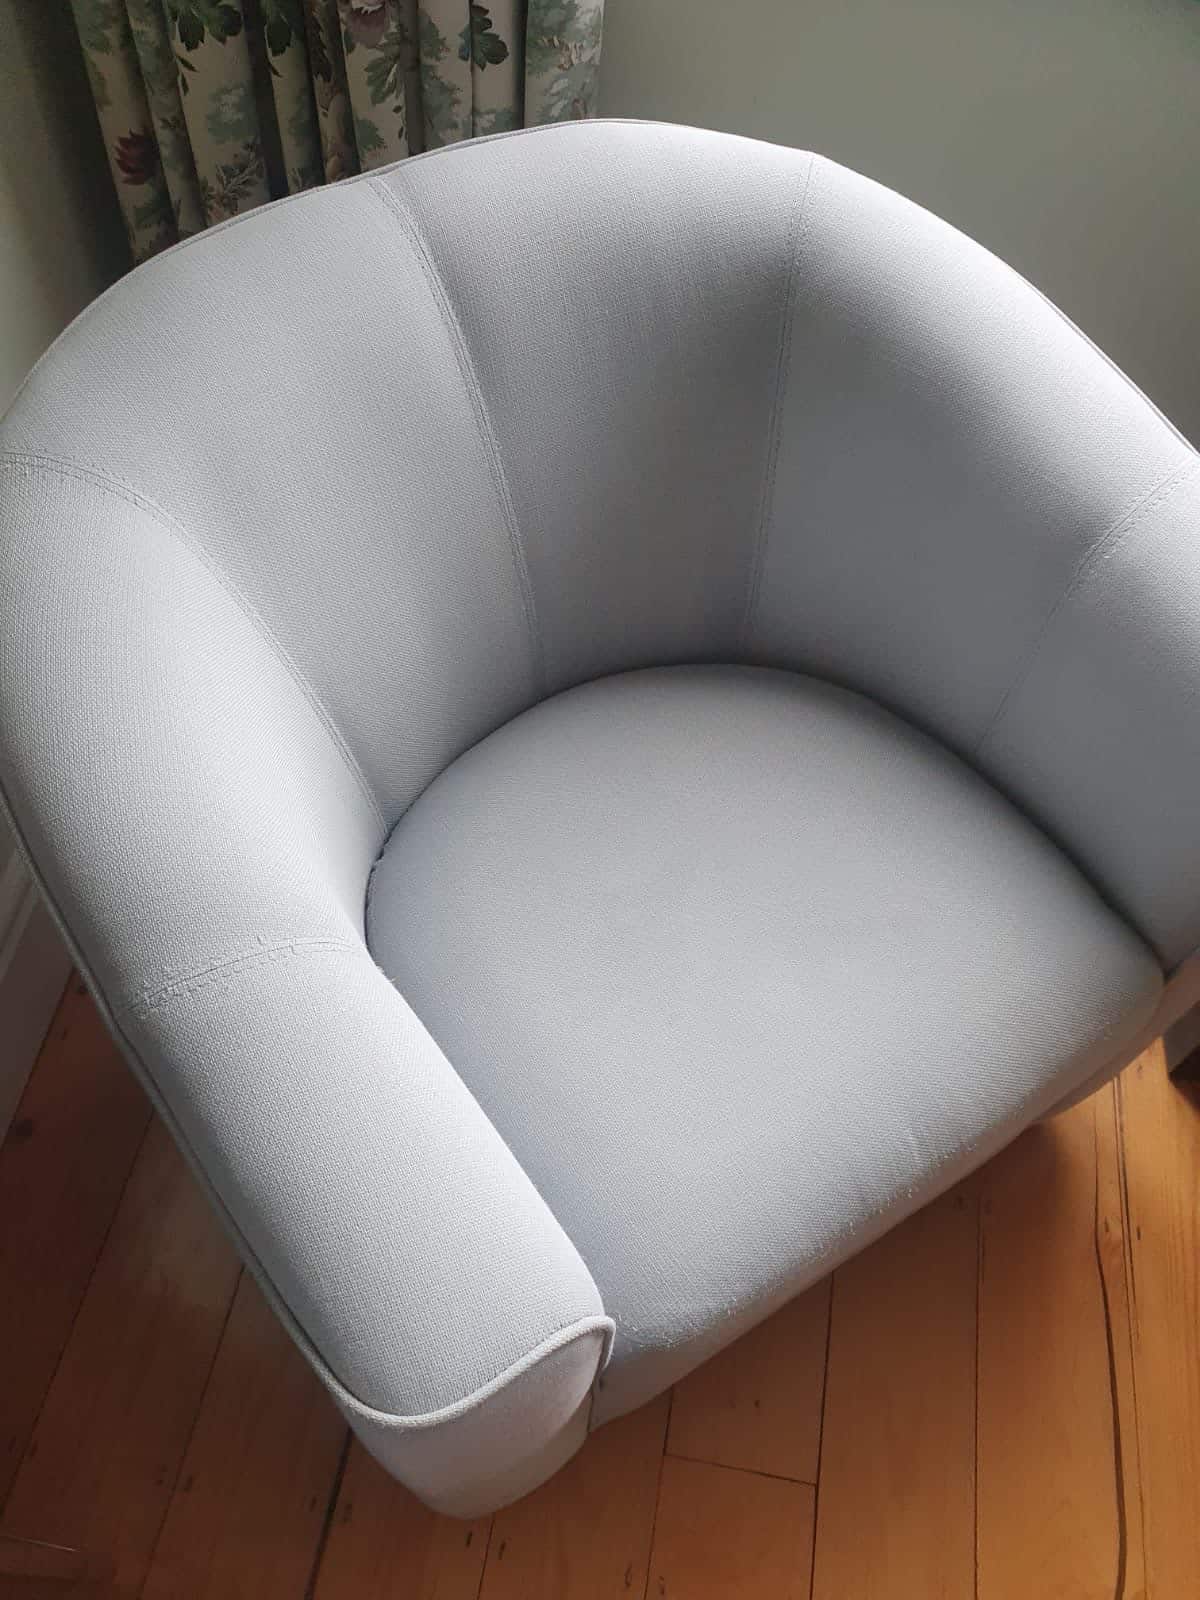 Upholstery Cleaning Dublin